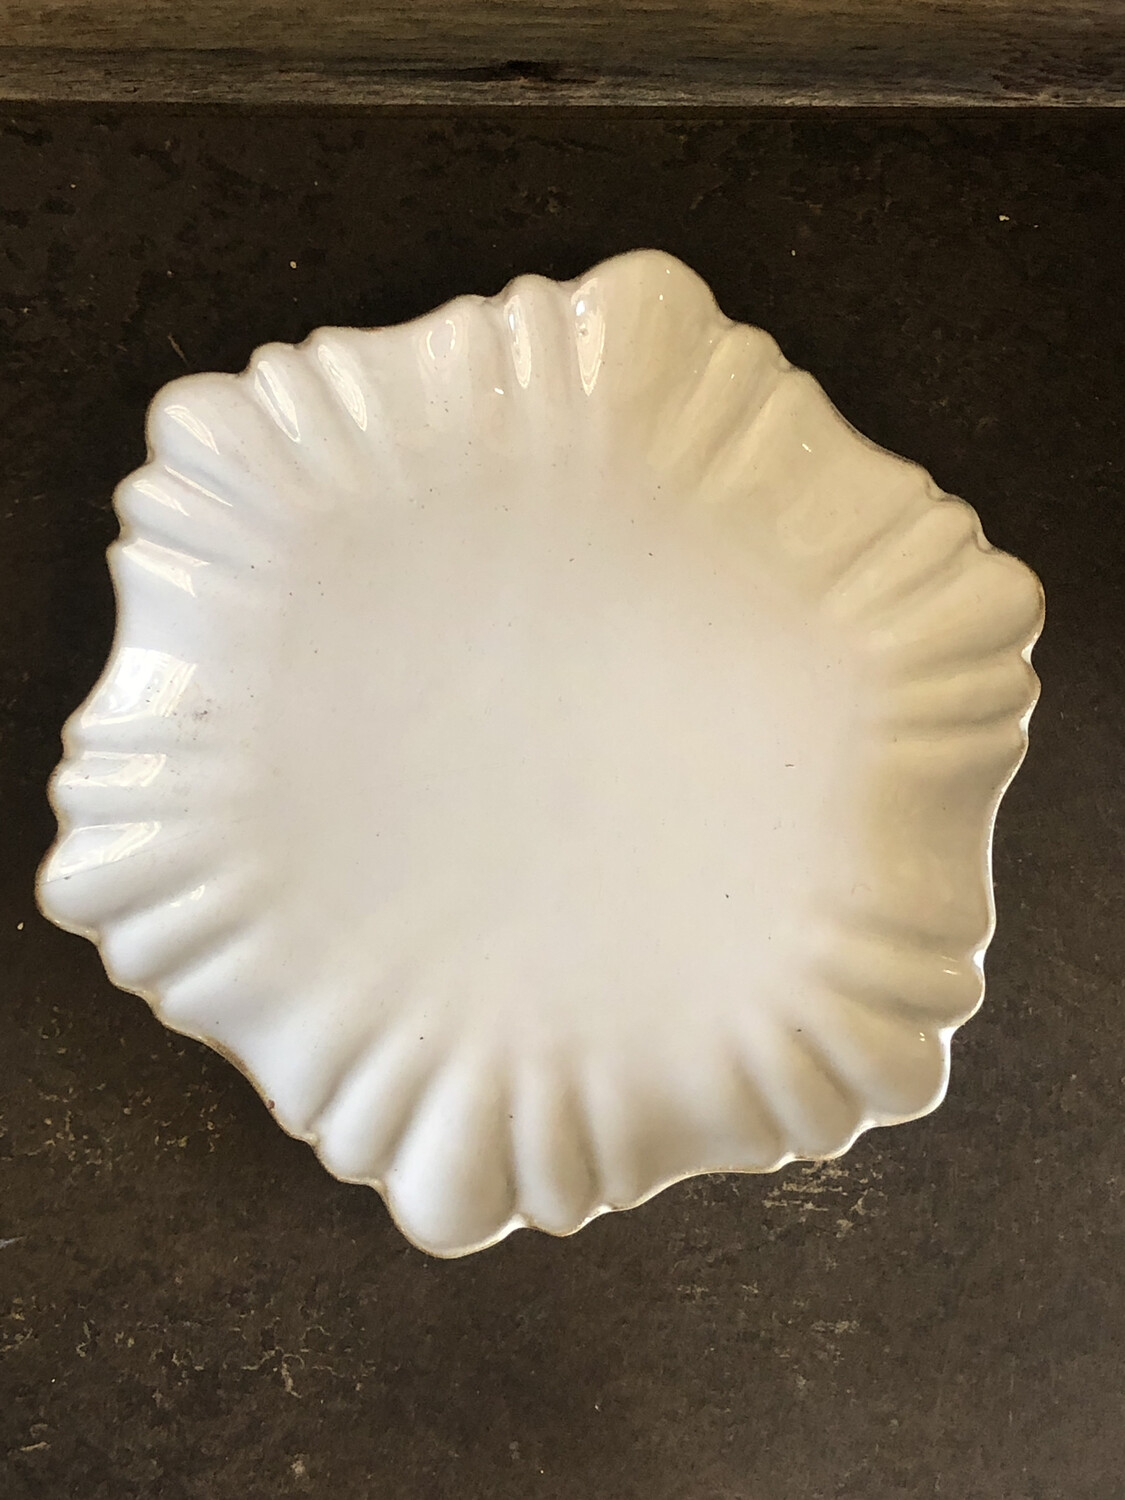 Scalloped Plate